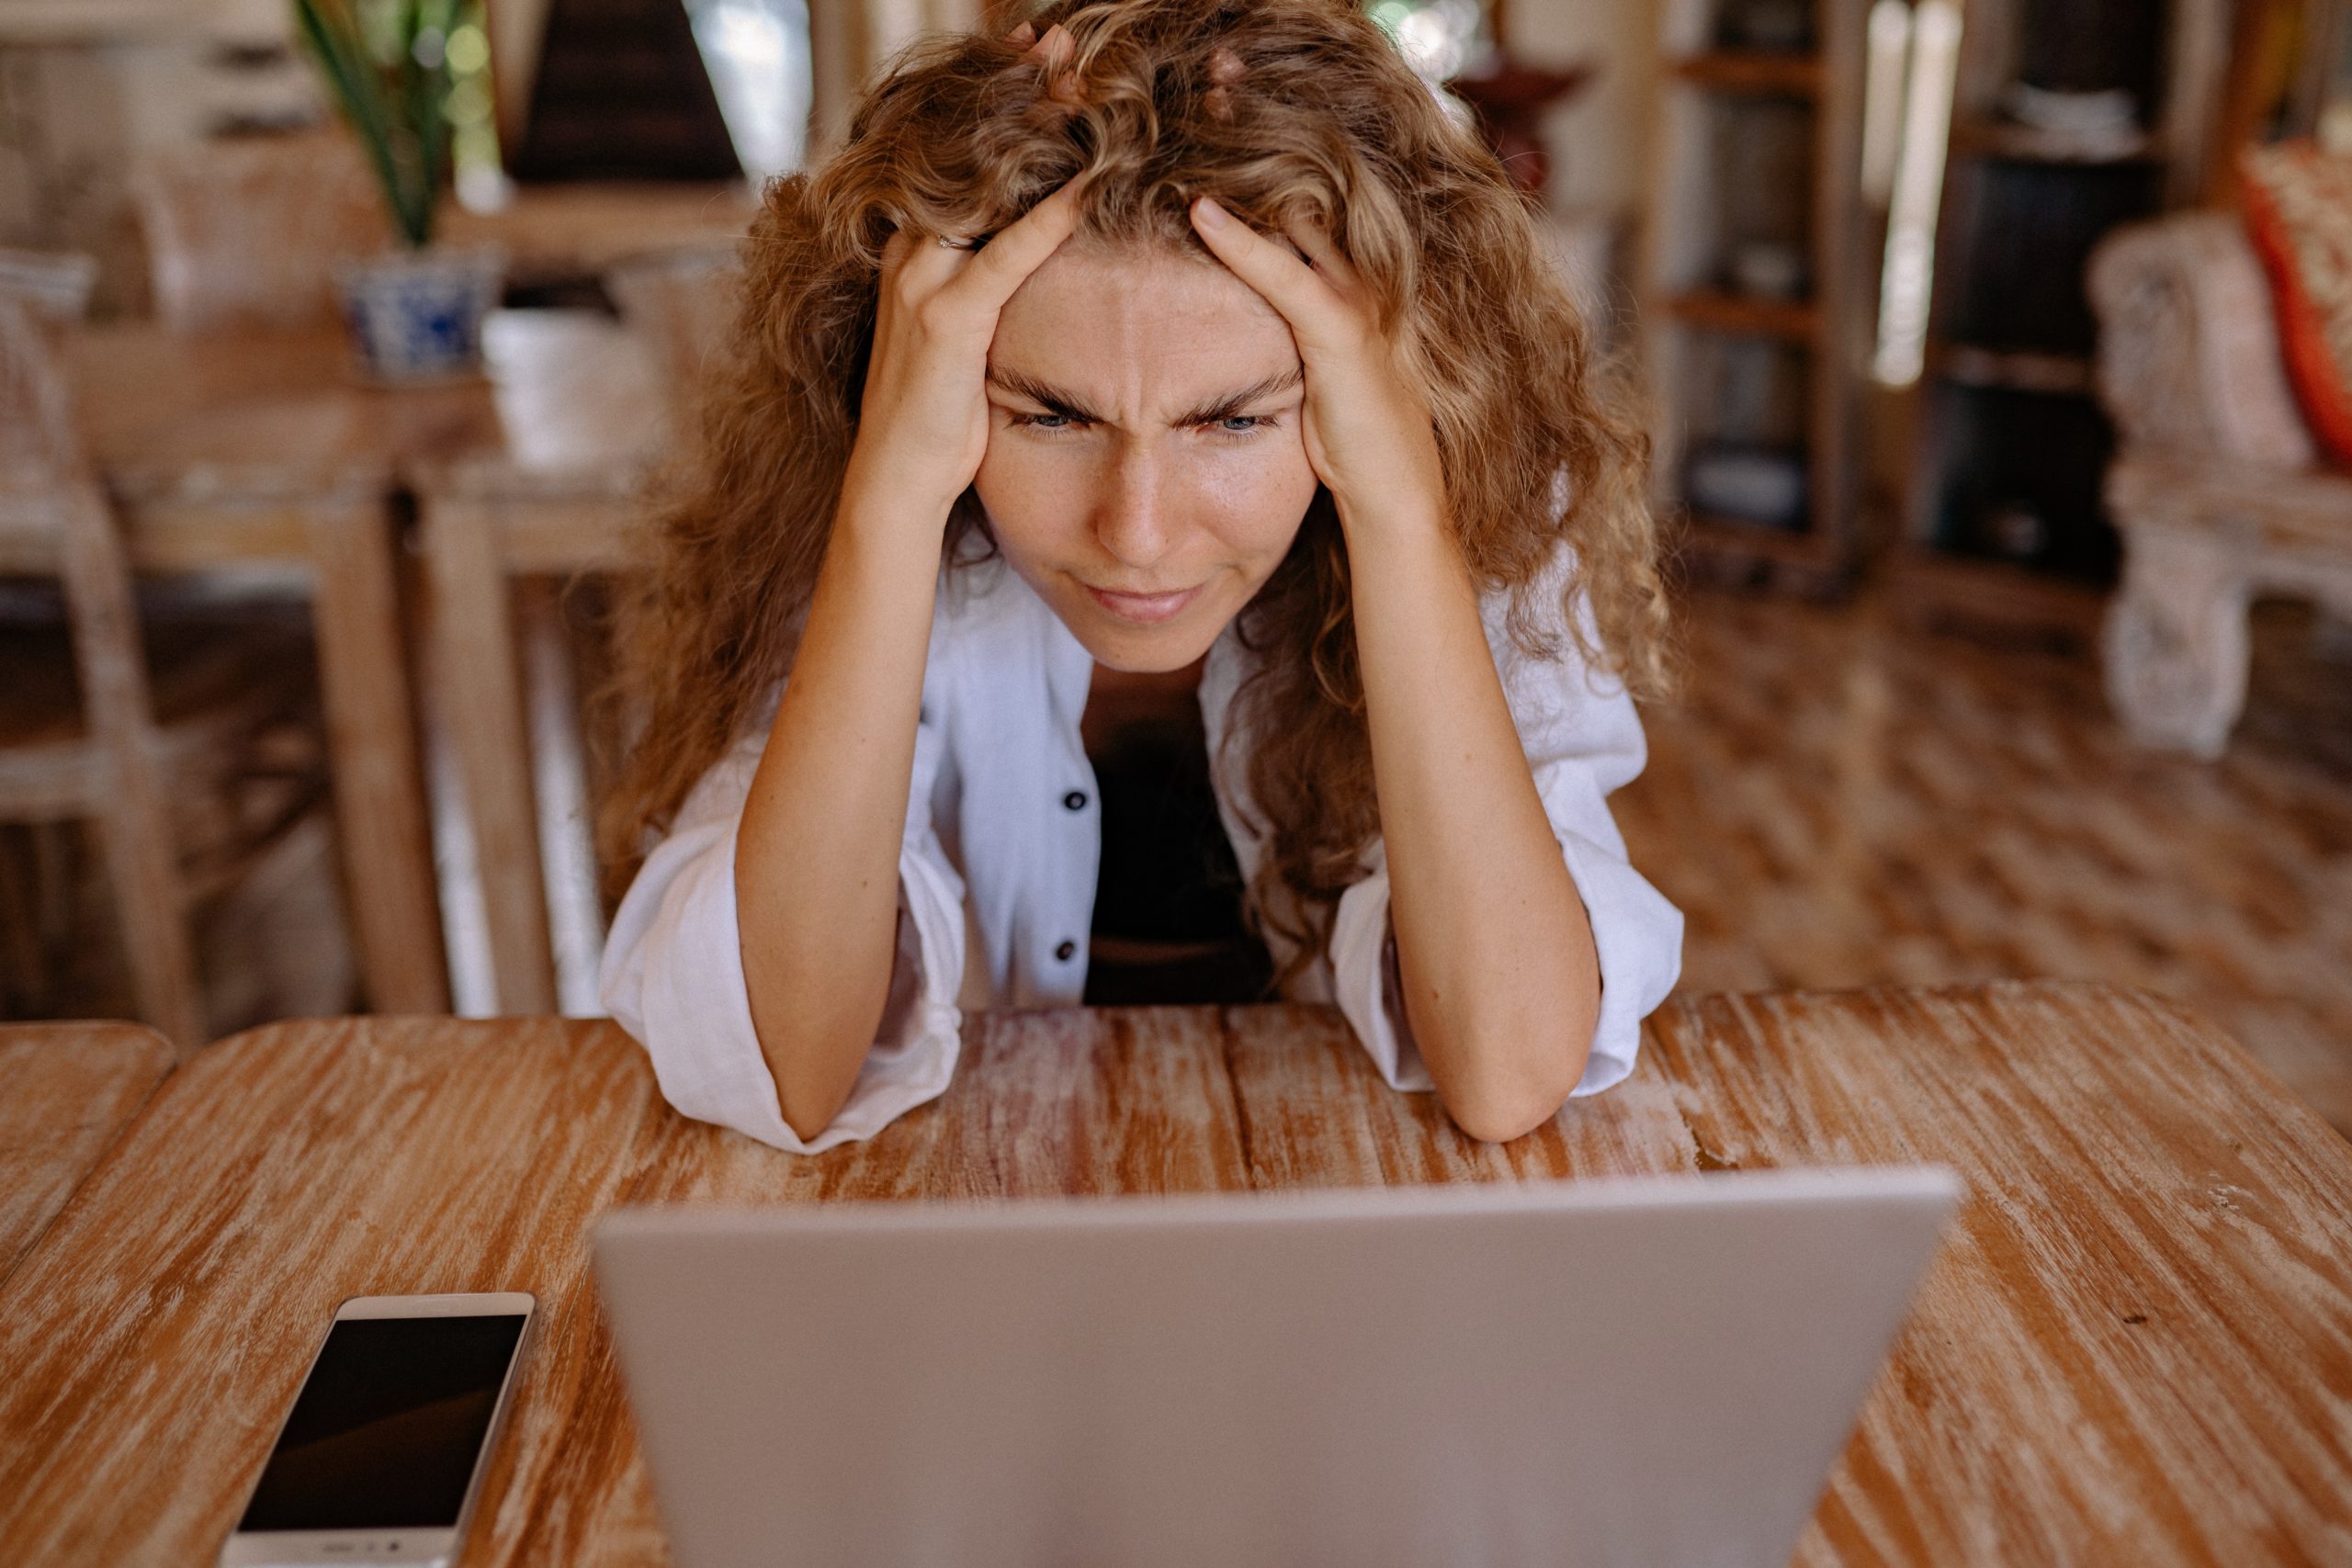 Woman frustrated with her hands in her hair as she looks frustrated at her laptop